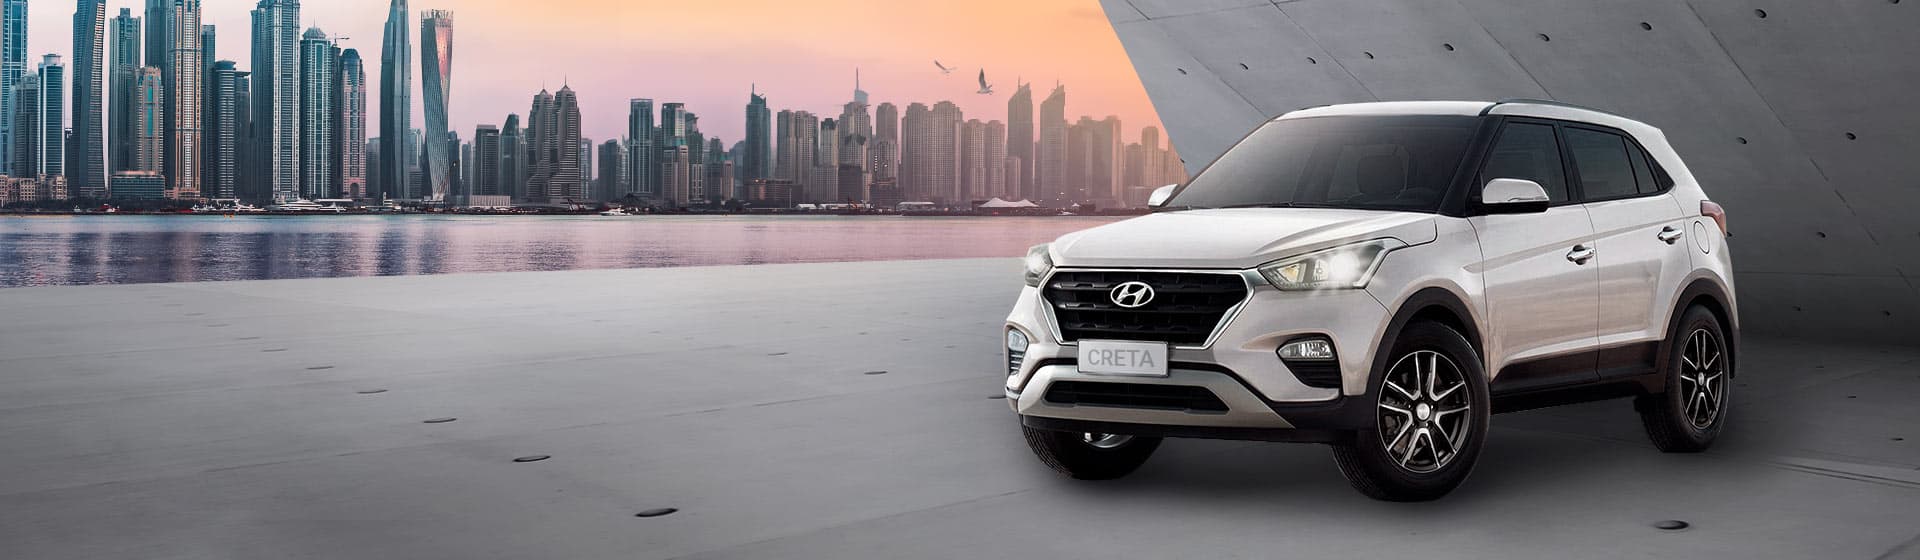 Rent the all New Hyundai CRETA (Model 2019) from AED 67/Day!